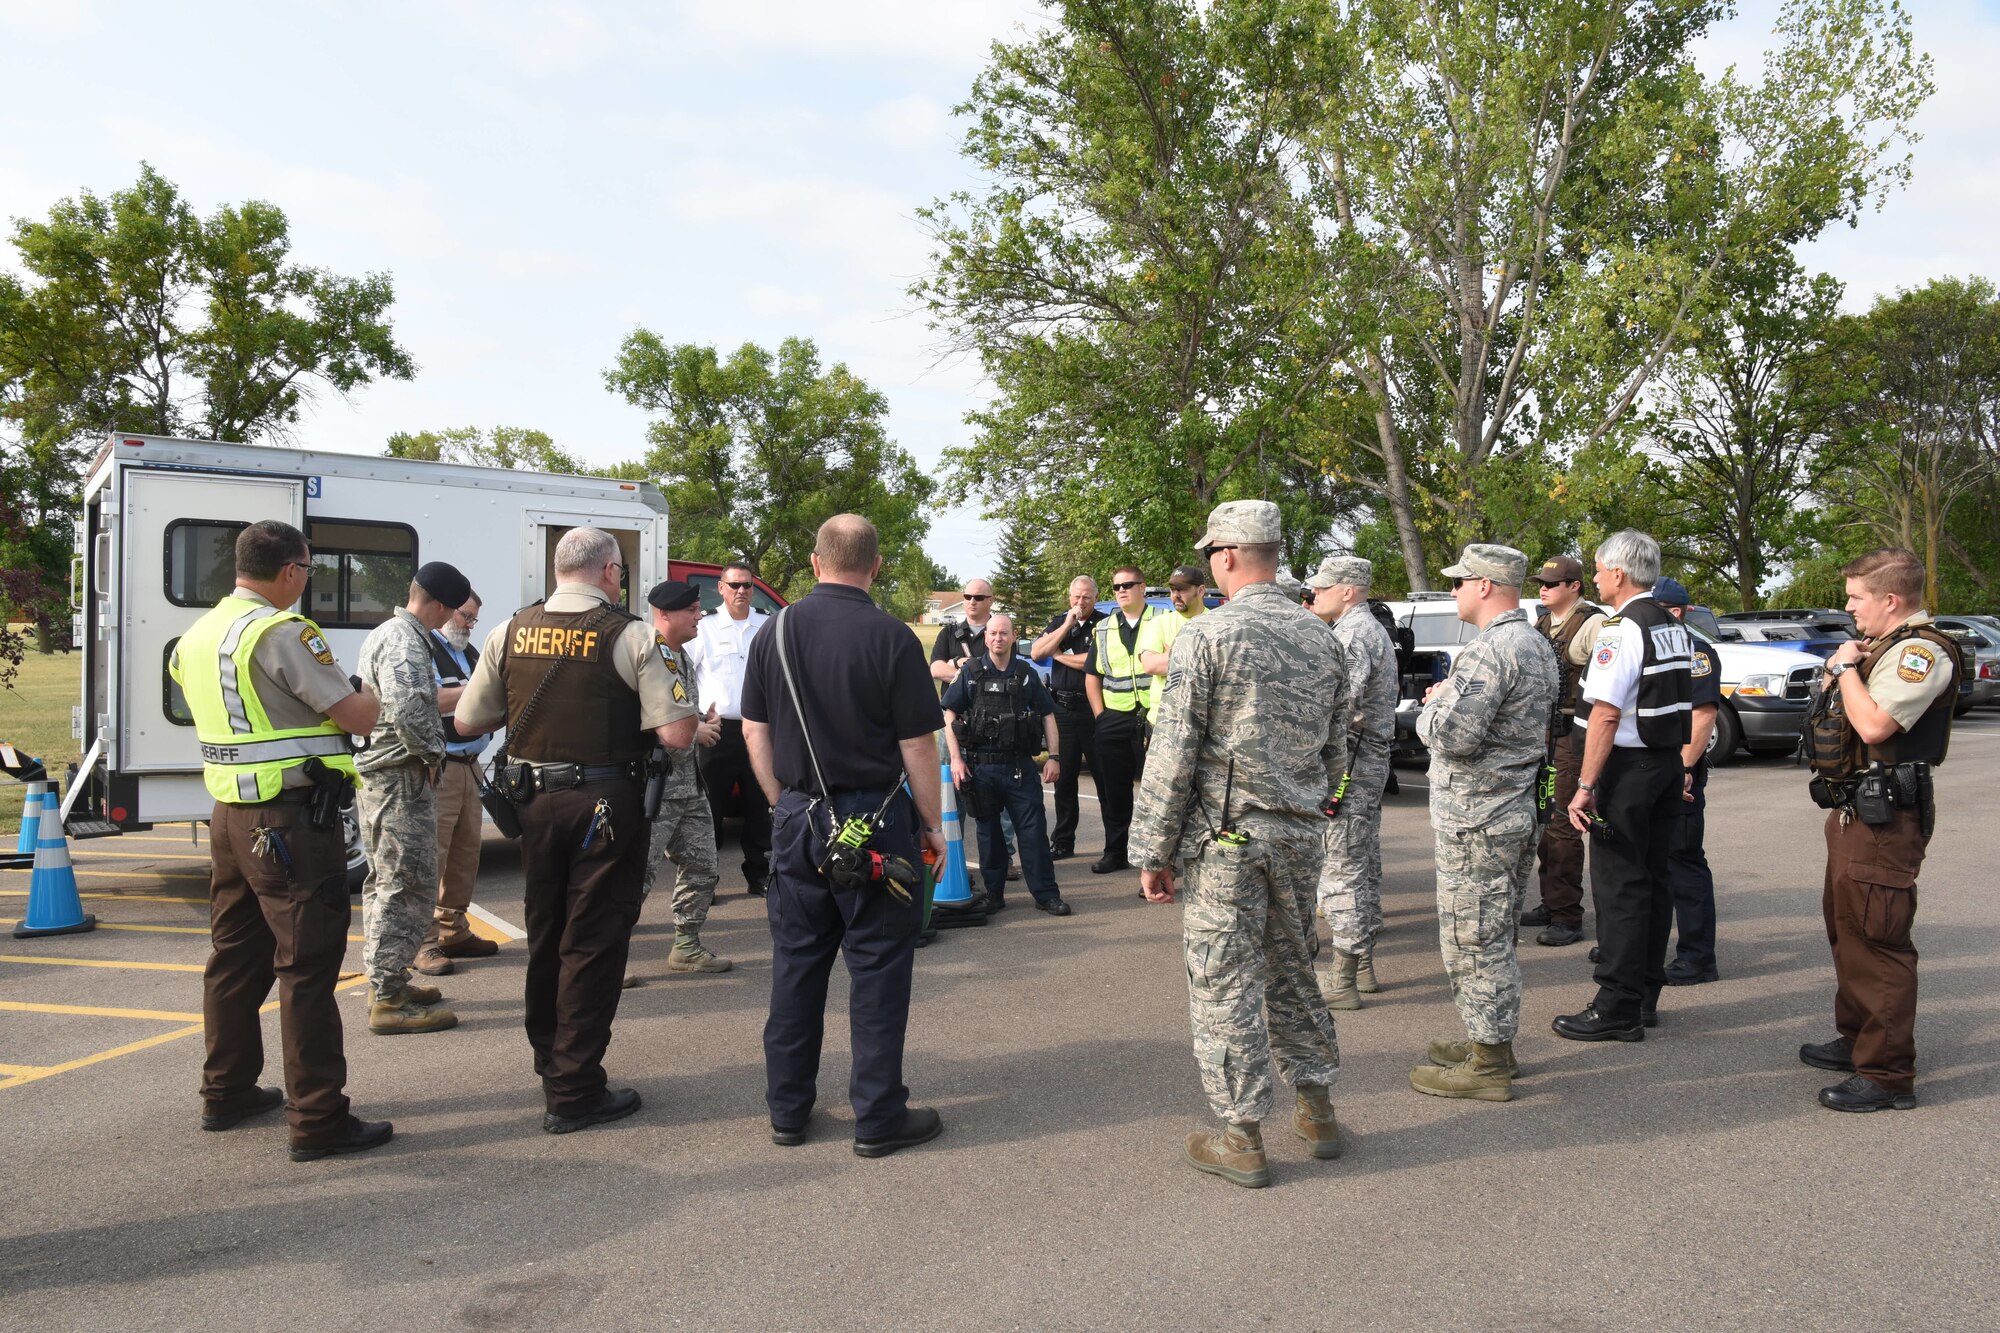 Grand Forks Air Force Base and local law enforcement rally to discuss events of an active-shooter exercise August 14, 2018, on Grand Forks Air Force Base, North Dakota. The exercise was a collaborative effort between the Grand Forks AFB law enforcement and medical units, Grand Forks County law enforcement, and the Grand Forks Public School administration. (U.S. Air Force photo by Senior Airman Elijaih Tiggs)